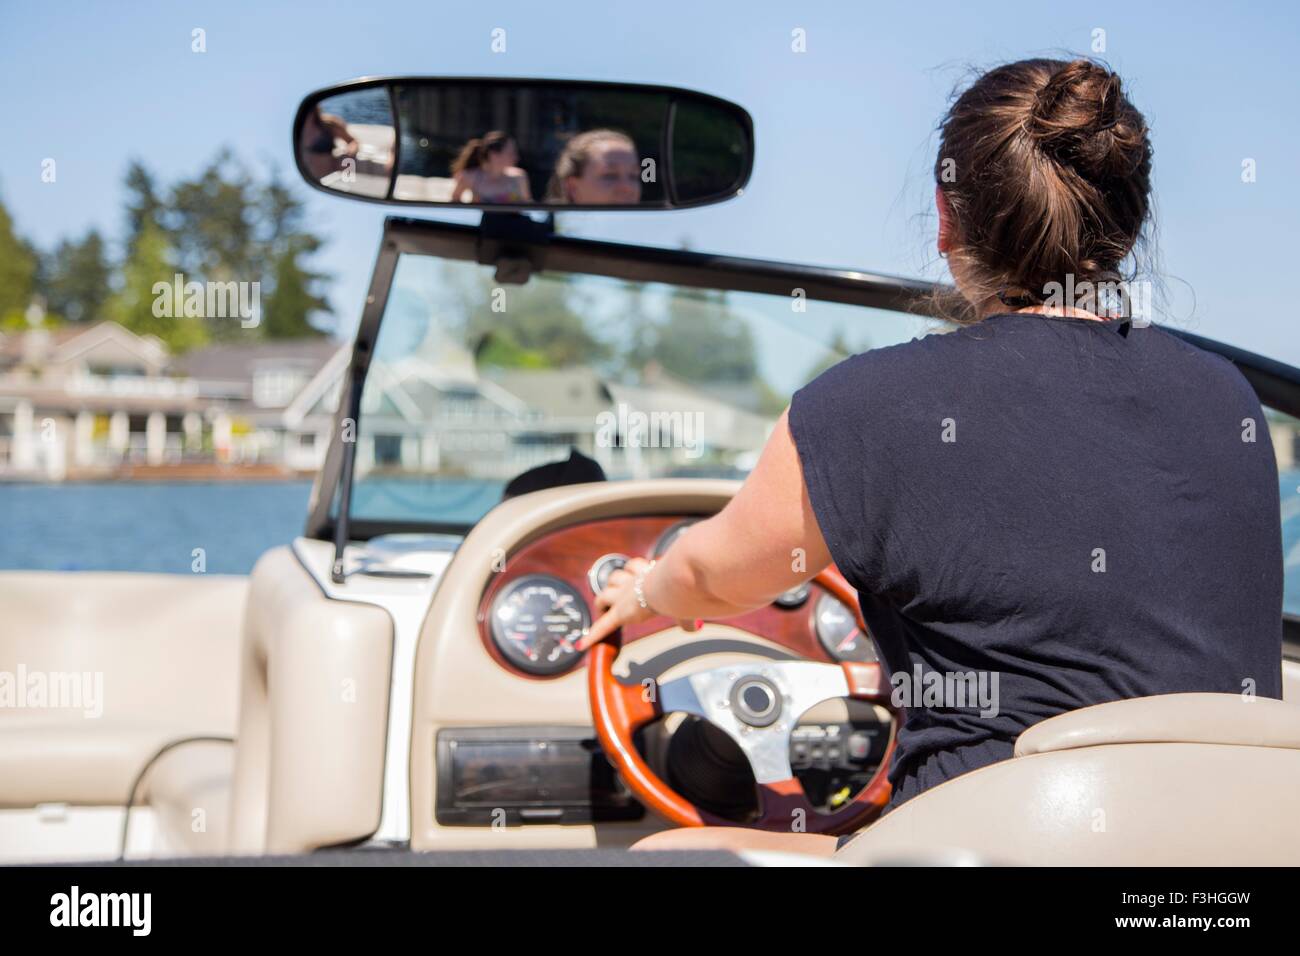 Rear view of young woman driving motor boat, Lake Oswego, Oregon, USA Stock Photo